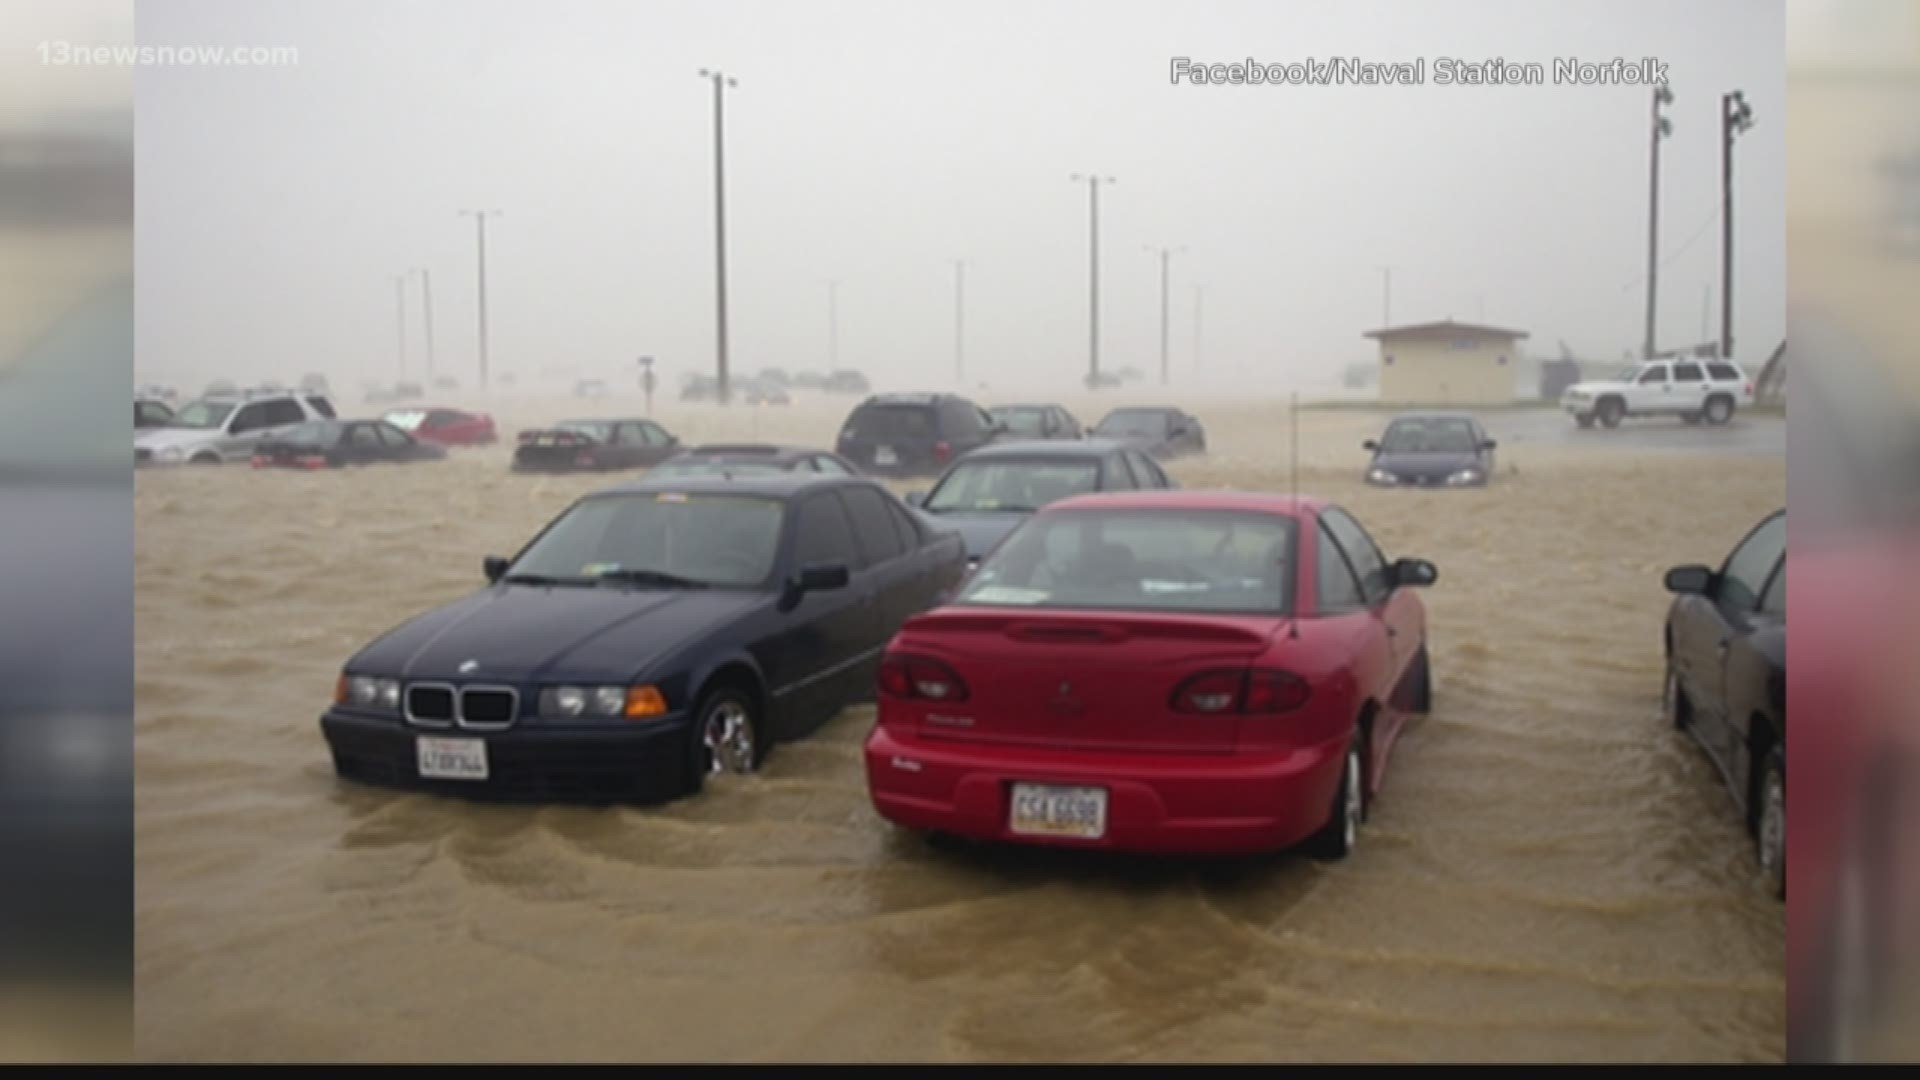 Navy officials said the area is prone to heavy flooding, especially the parking lots near the waterfront.